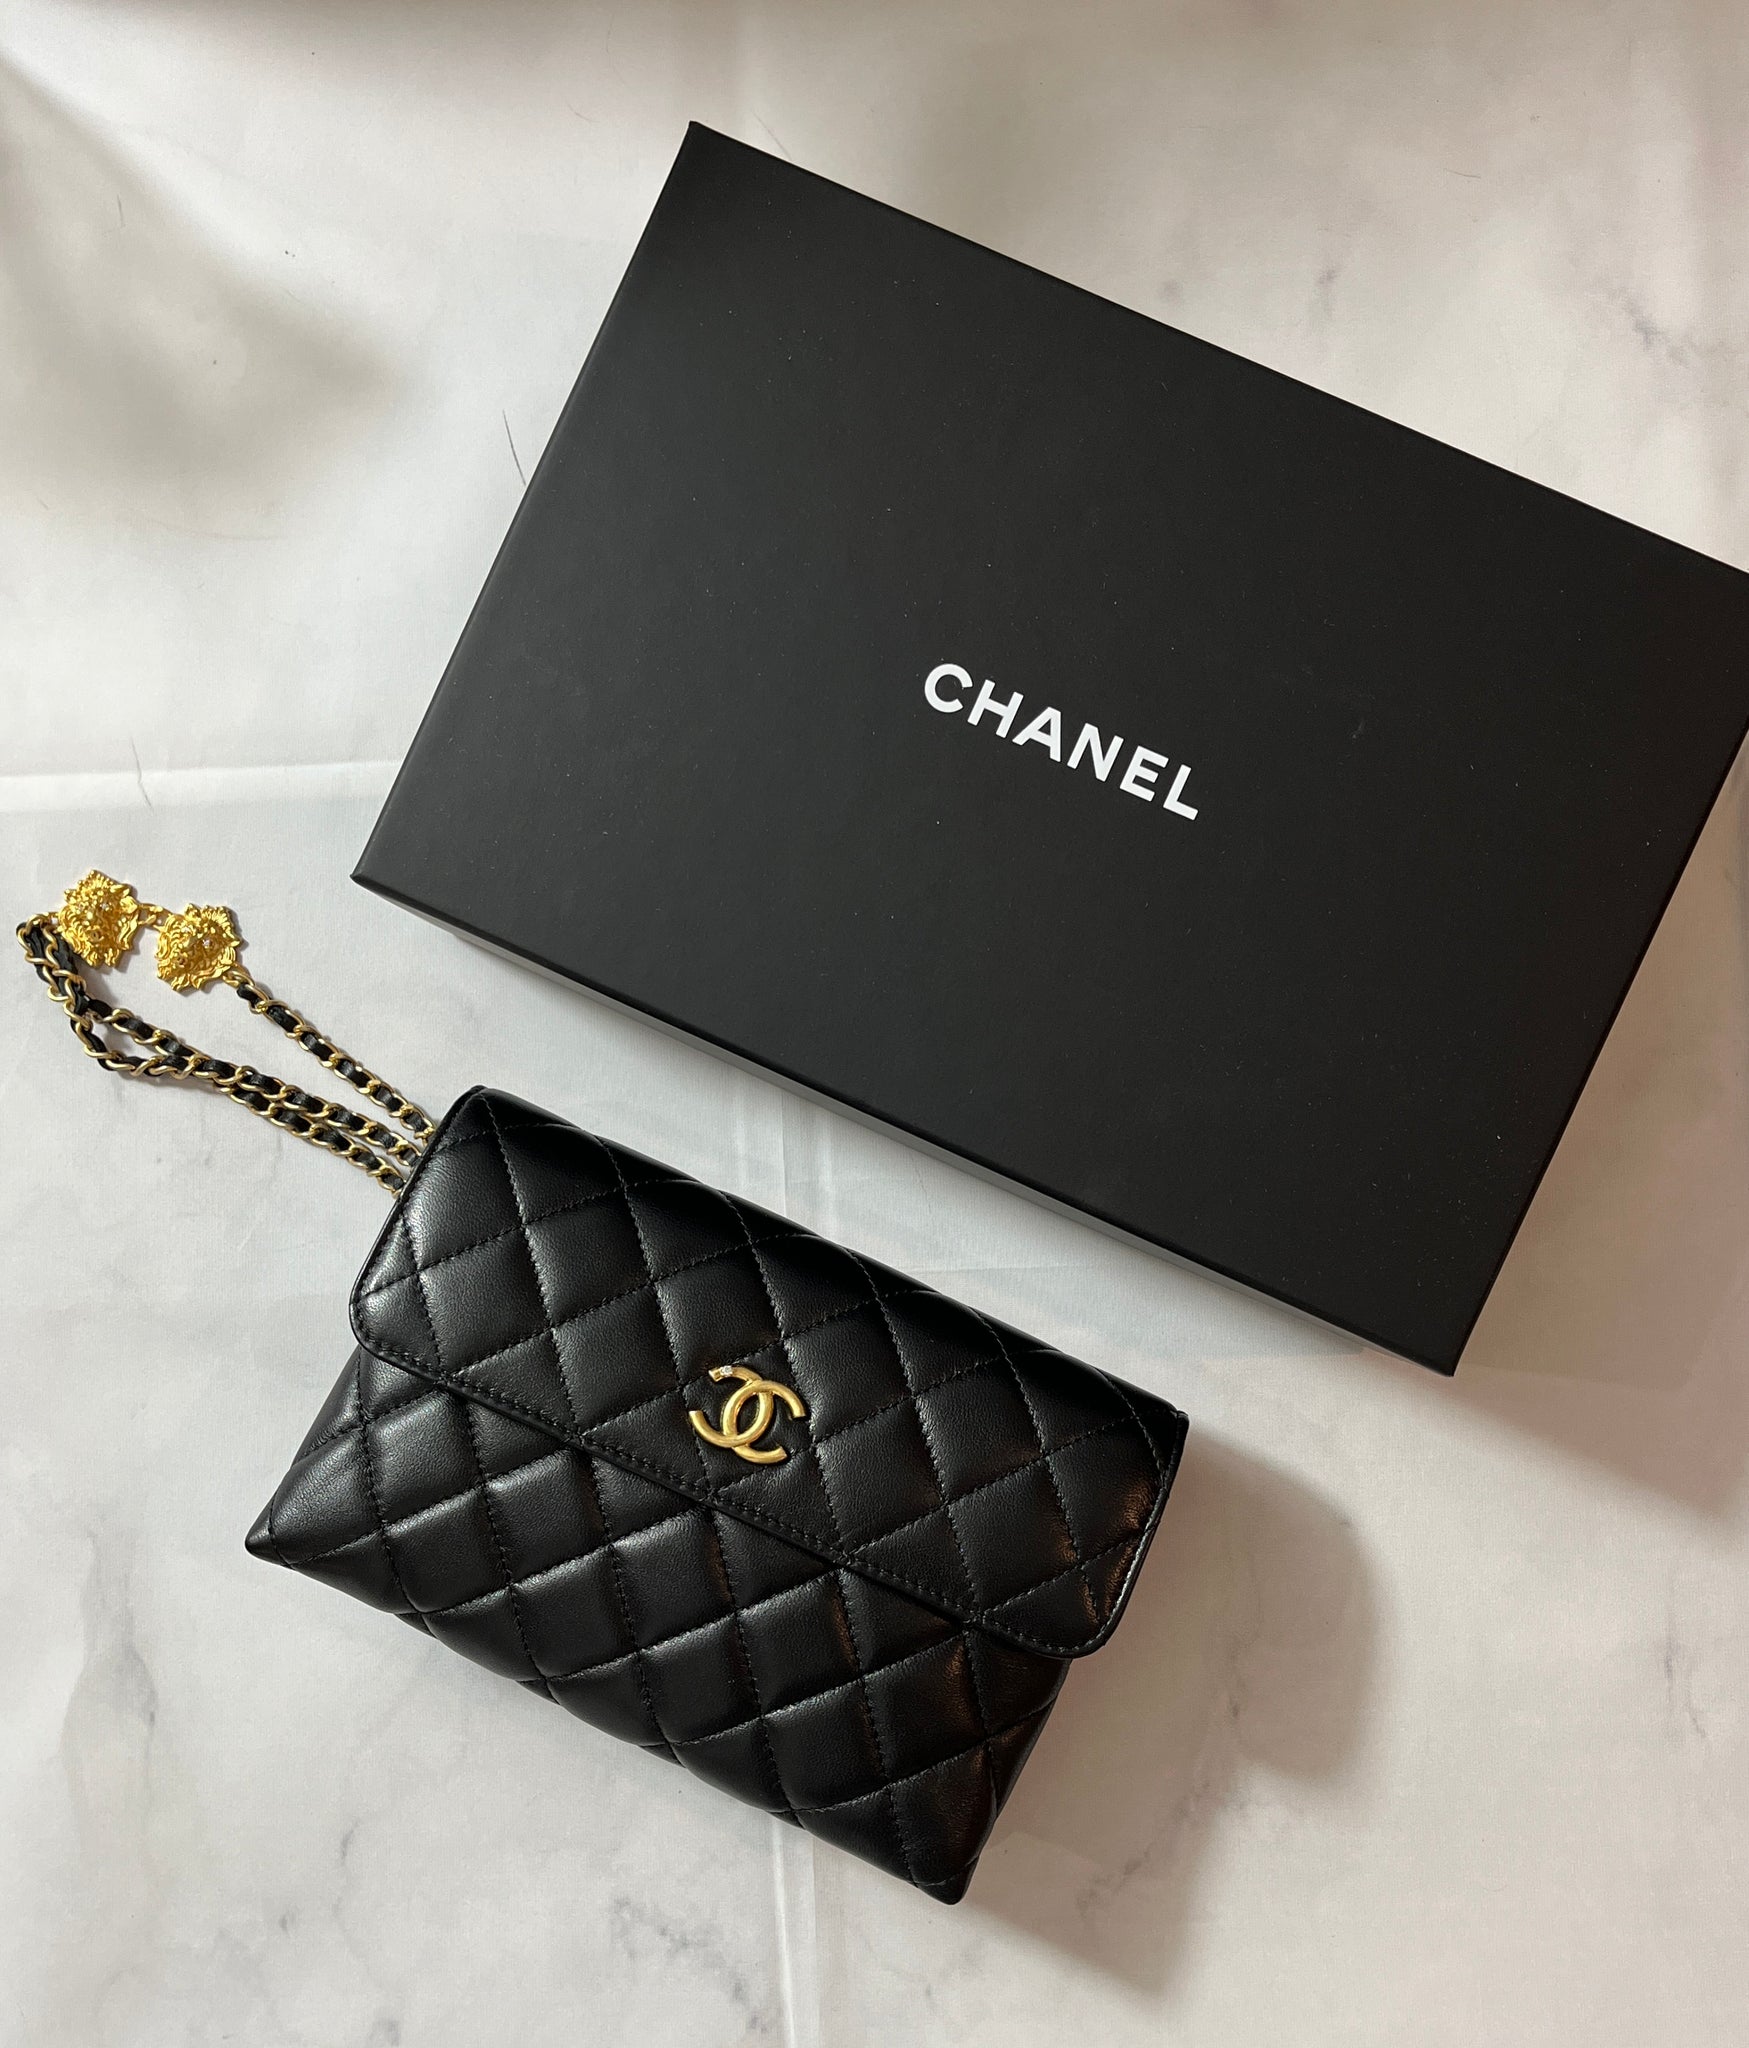 Which is better, Classic Mini Chanel or Chanel 19 bag? - Quora